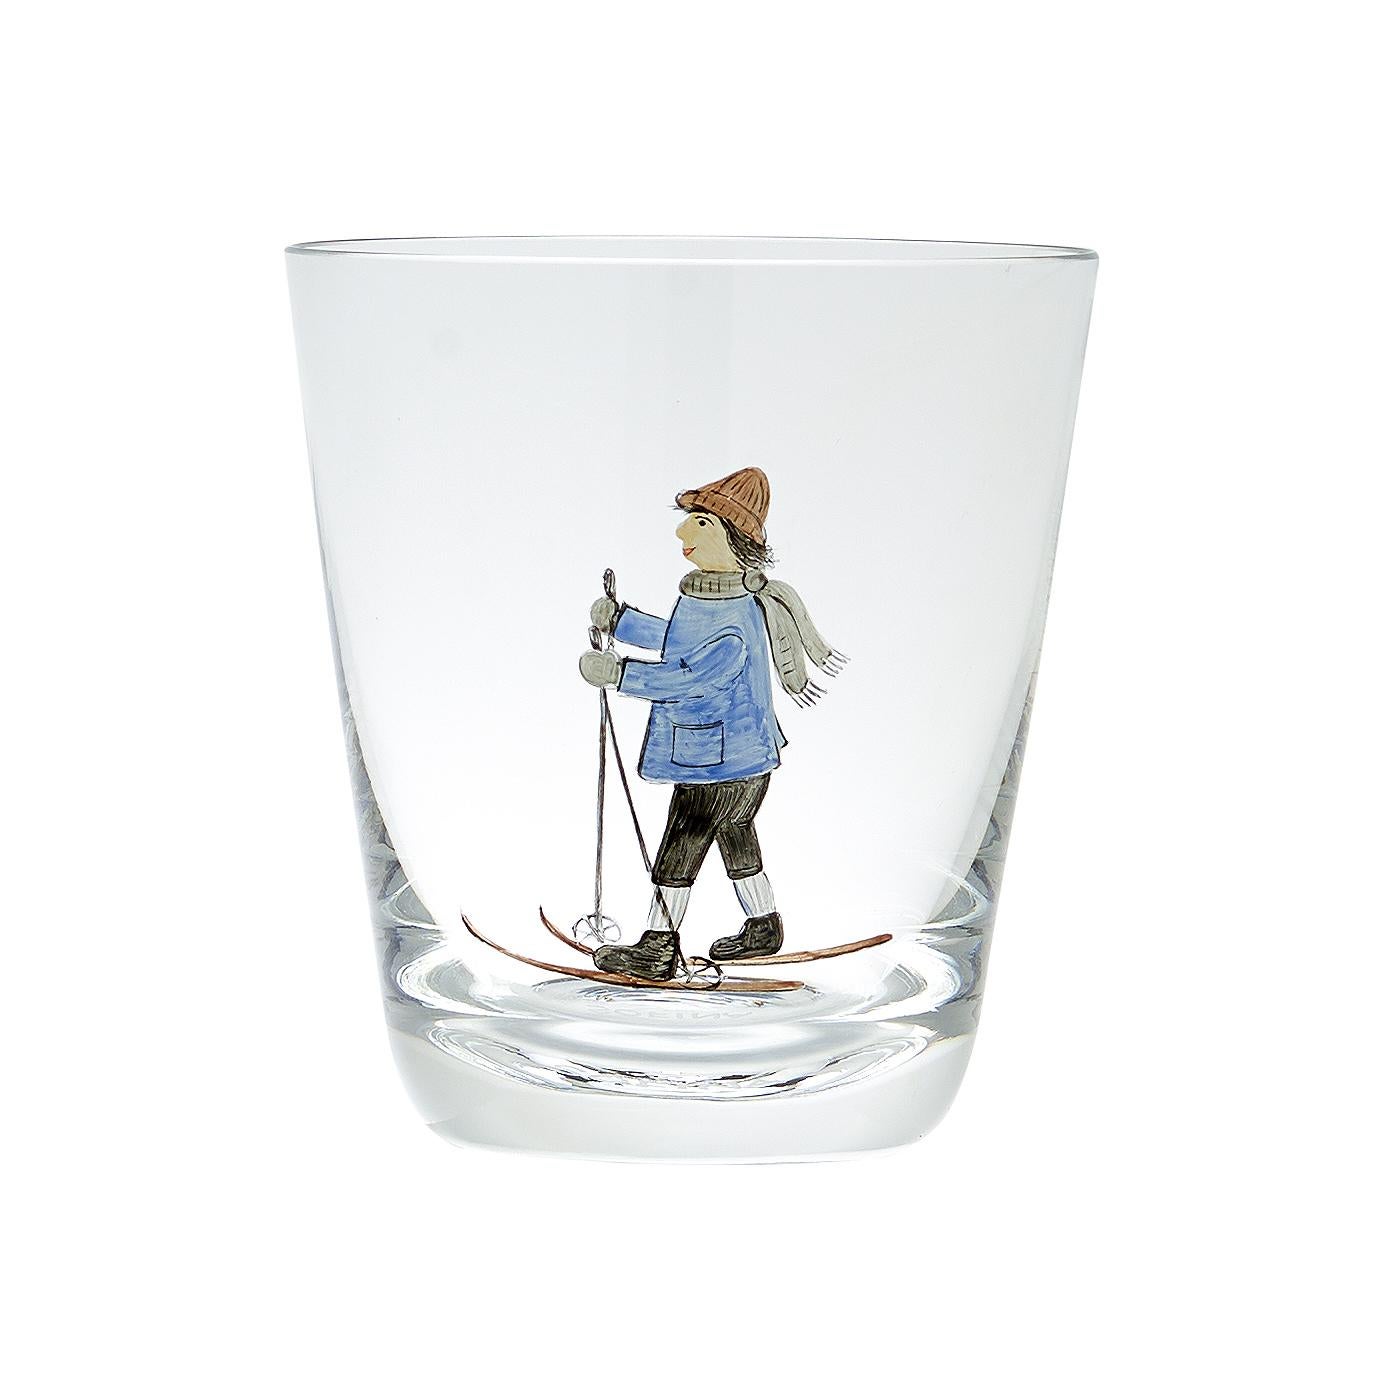 Set of six hand blown crystal glass tumbler. Decorated with a hands-free painted skiier boy in country style.
Comes in six different colors. Can be ordered in mixed colors or by each color. Made by hand in Germany.
Handpainted crystal is not